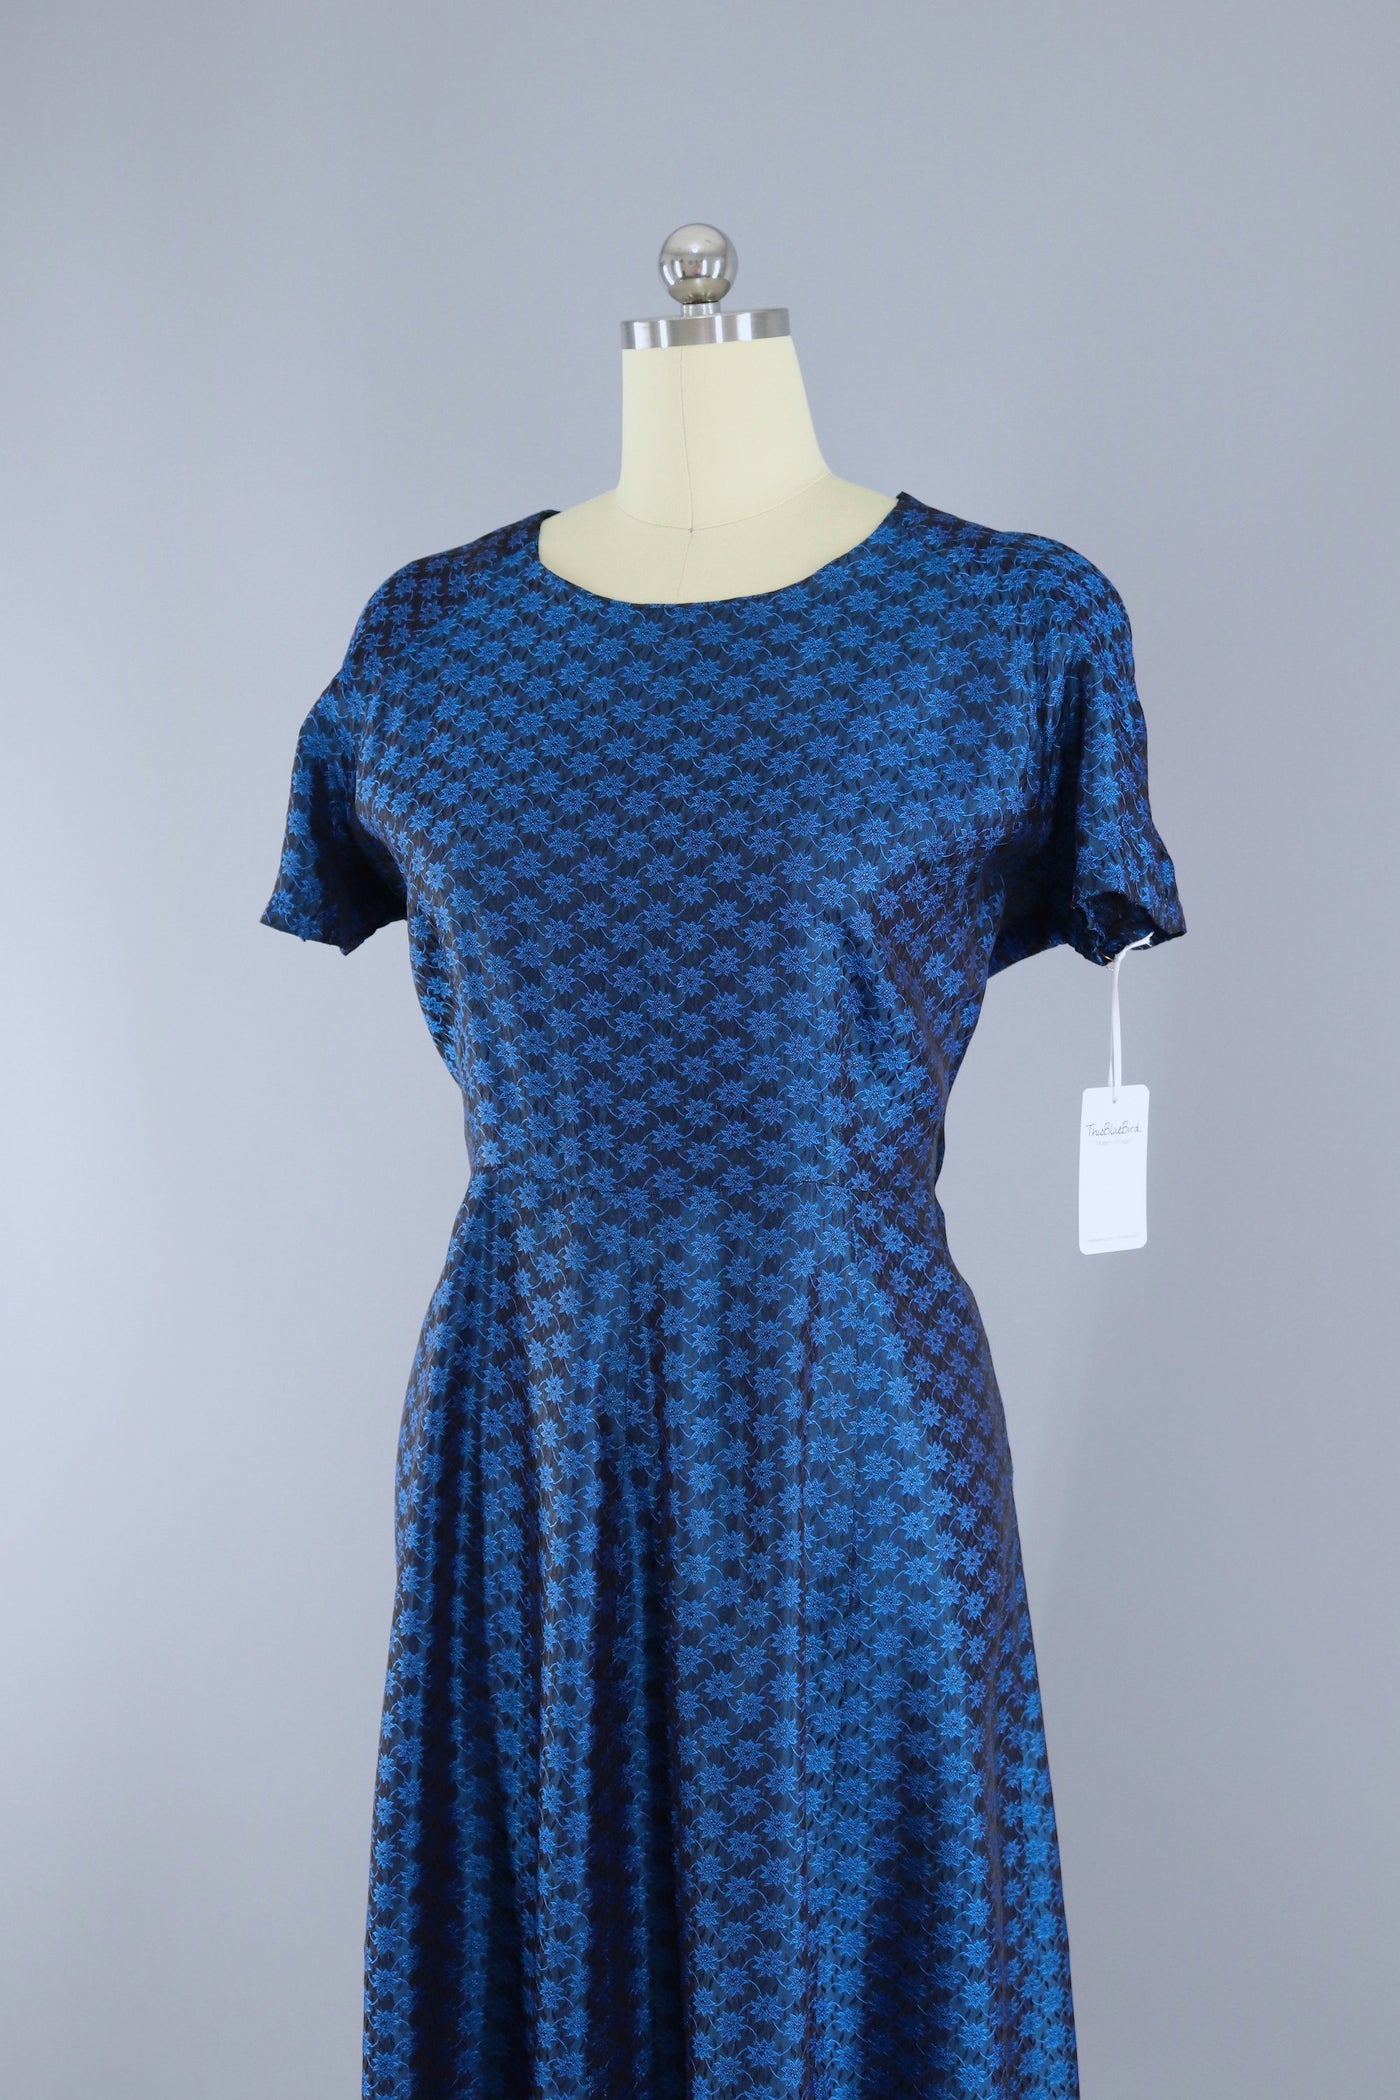 Vintage 1950s Blue Damask Cocktail Party Dress – ThisBlueBird